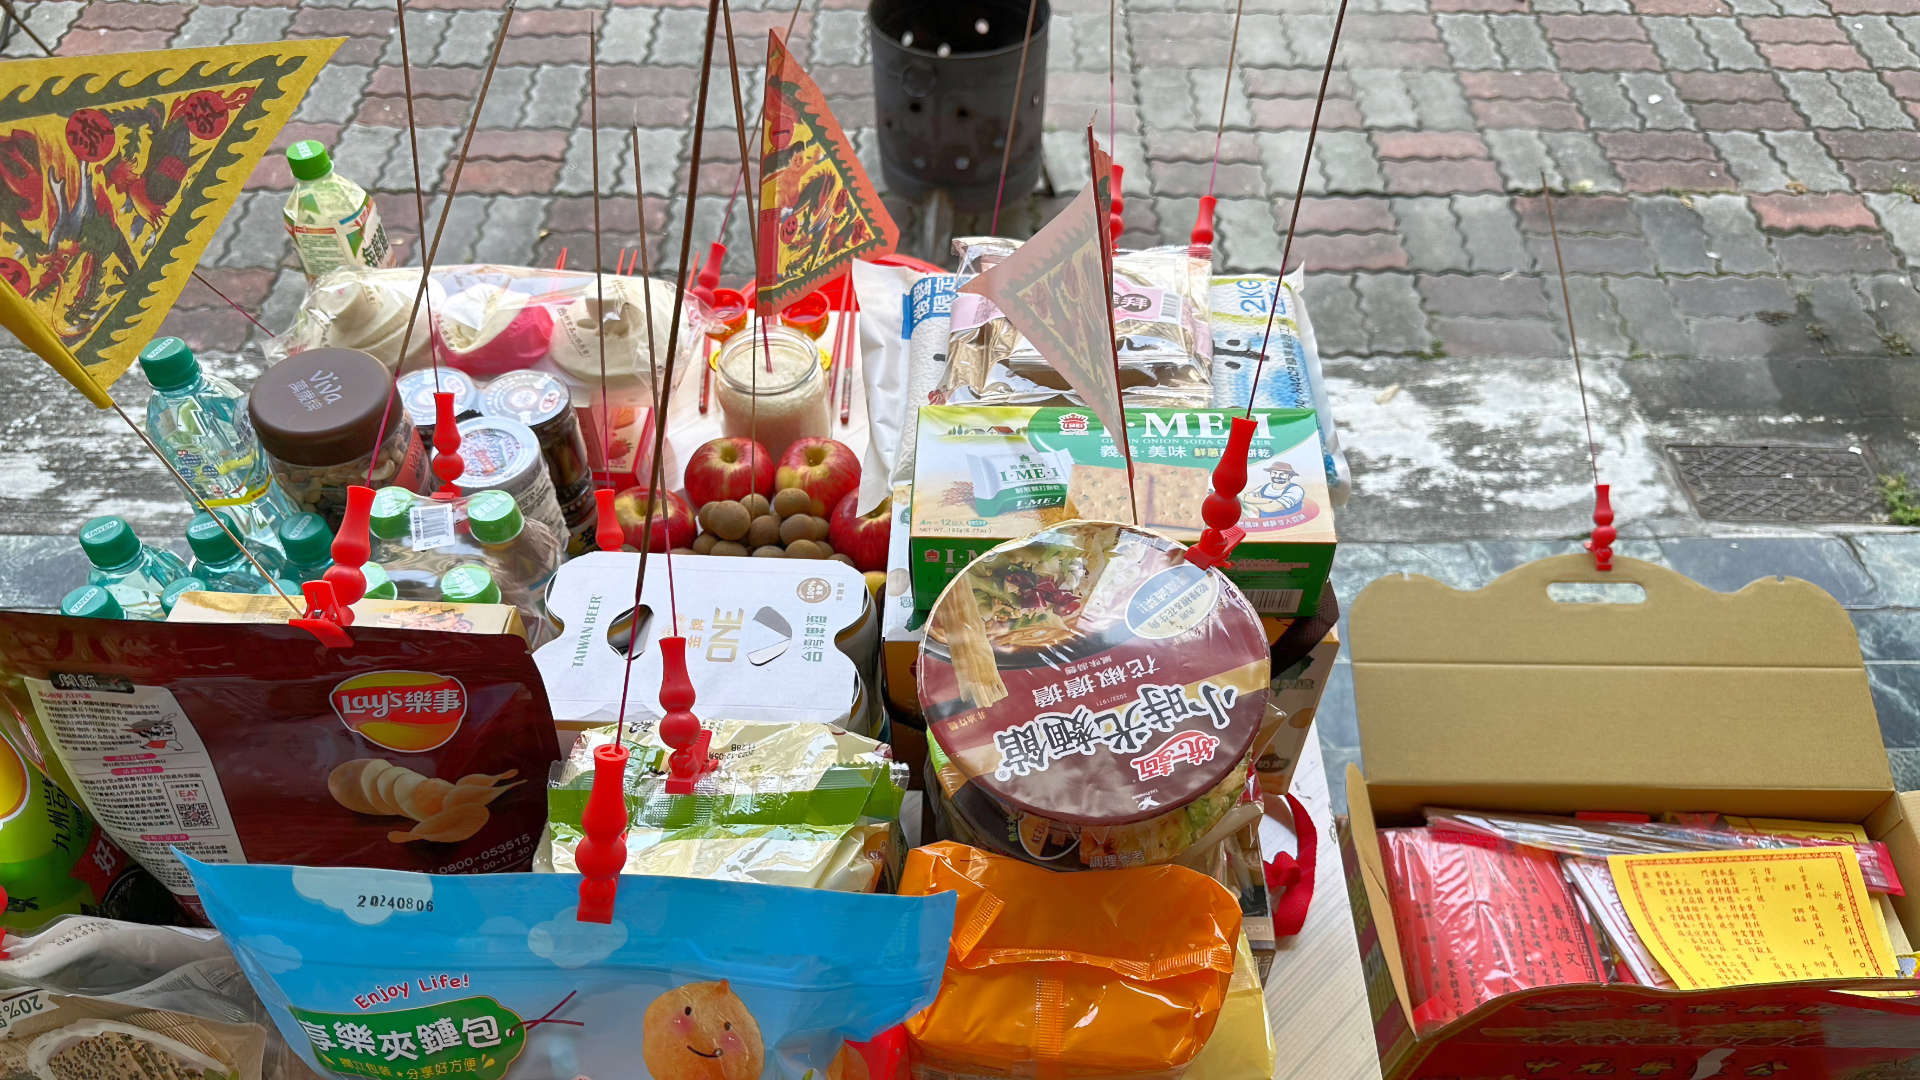 A table of food offerings on a sidewalk in Taiwan. The table is heaped high with food and drinks and burning incense sticks. On the far side of the table, a metal cylinder, slightly larger than a bucket, is sitting on the sidewalk.